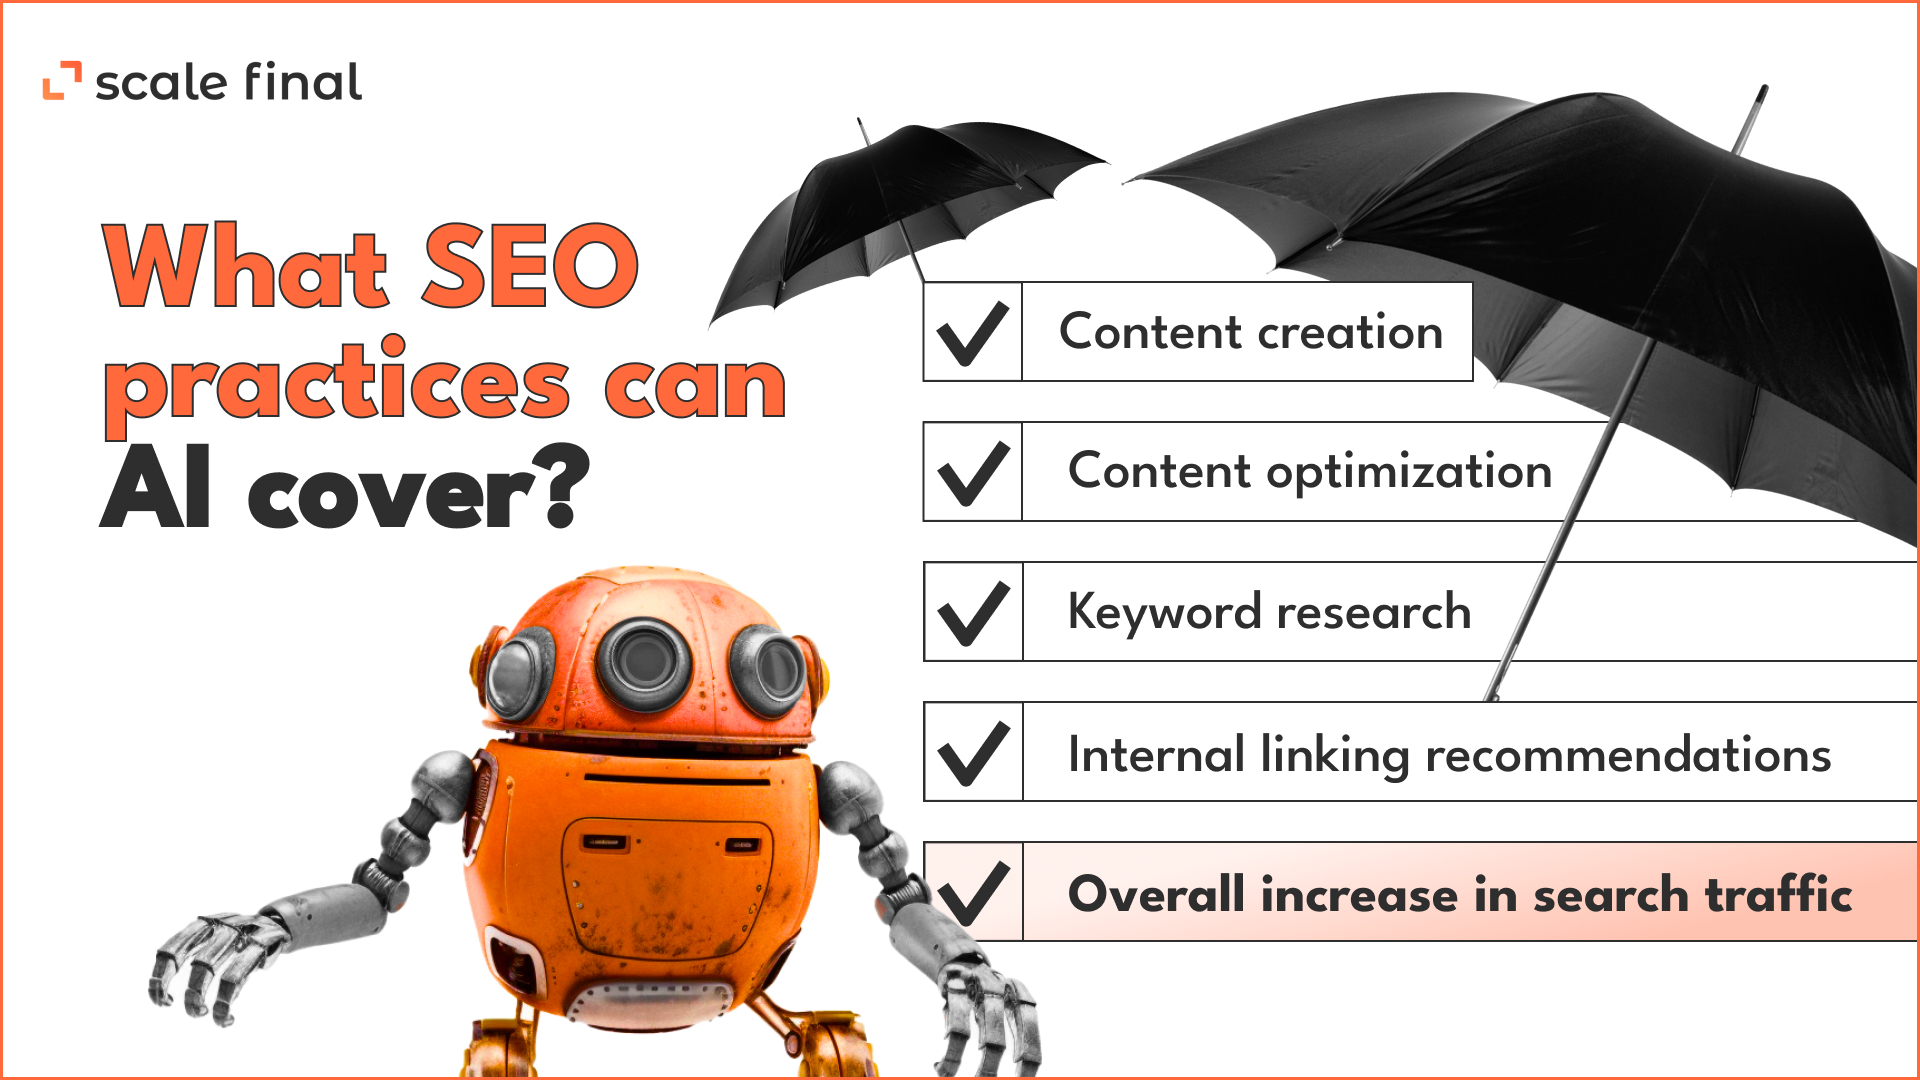 What SEO practices can AI cover?Content creation Content optimization Keyword researchInternal linking recommendationsOverall increase in search traffic 